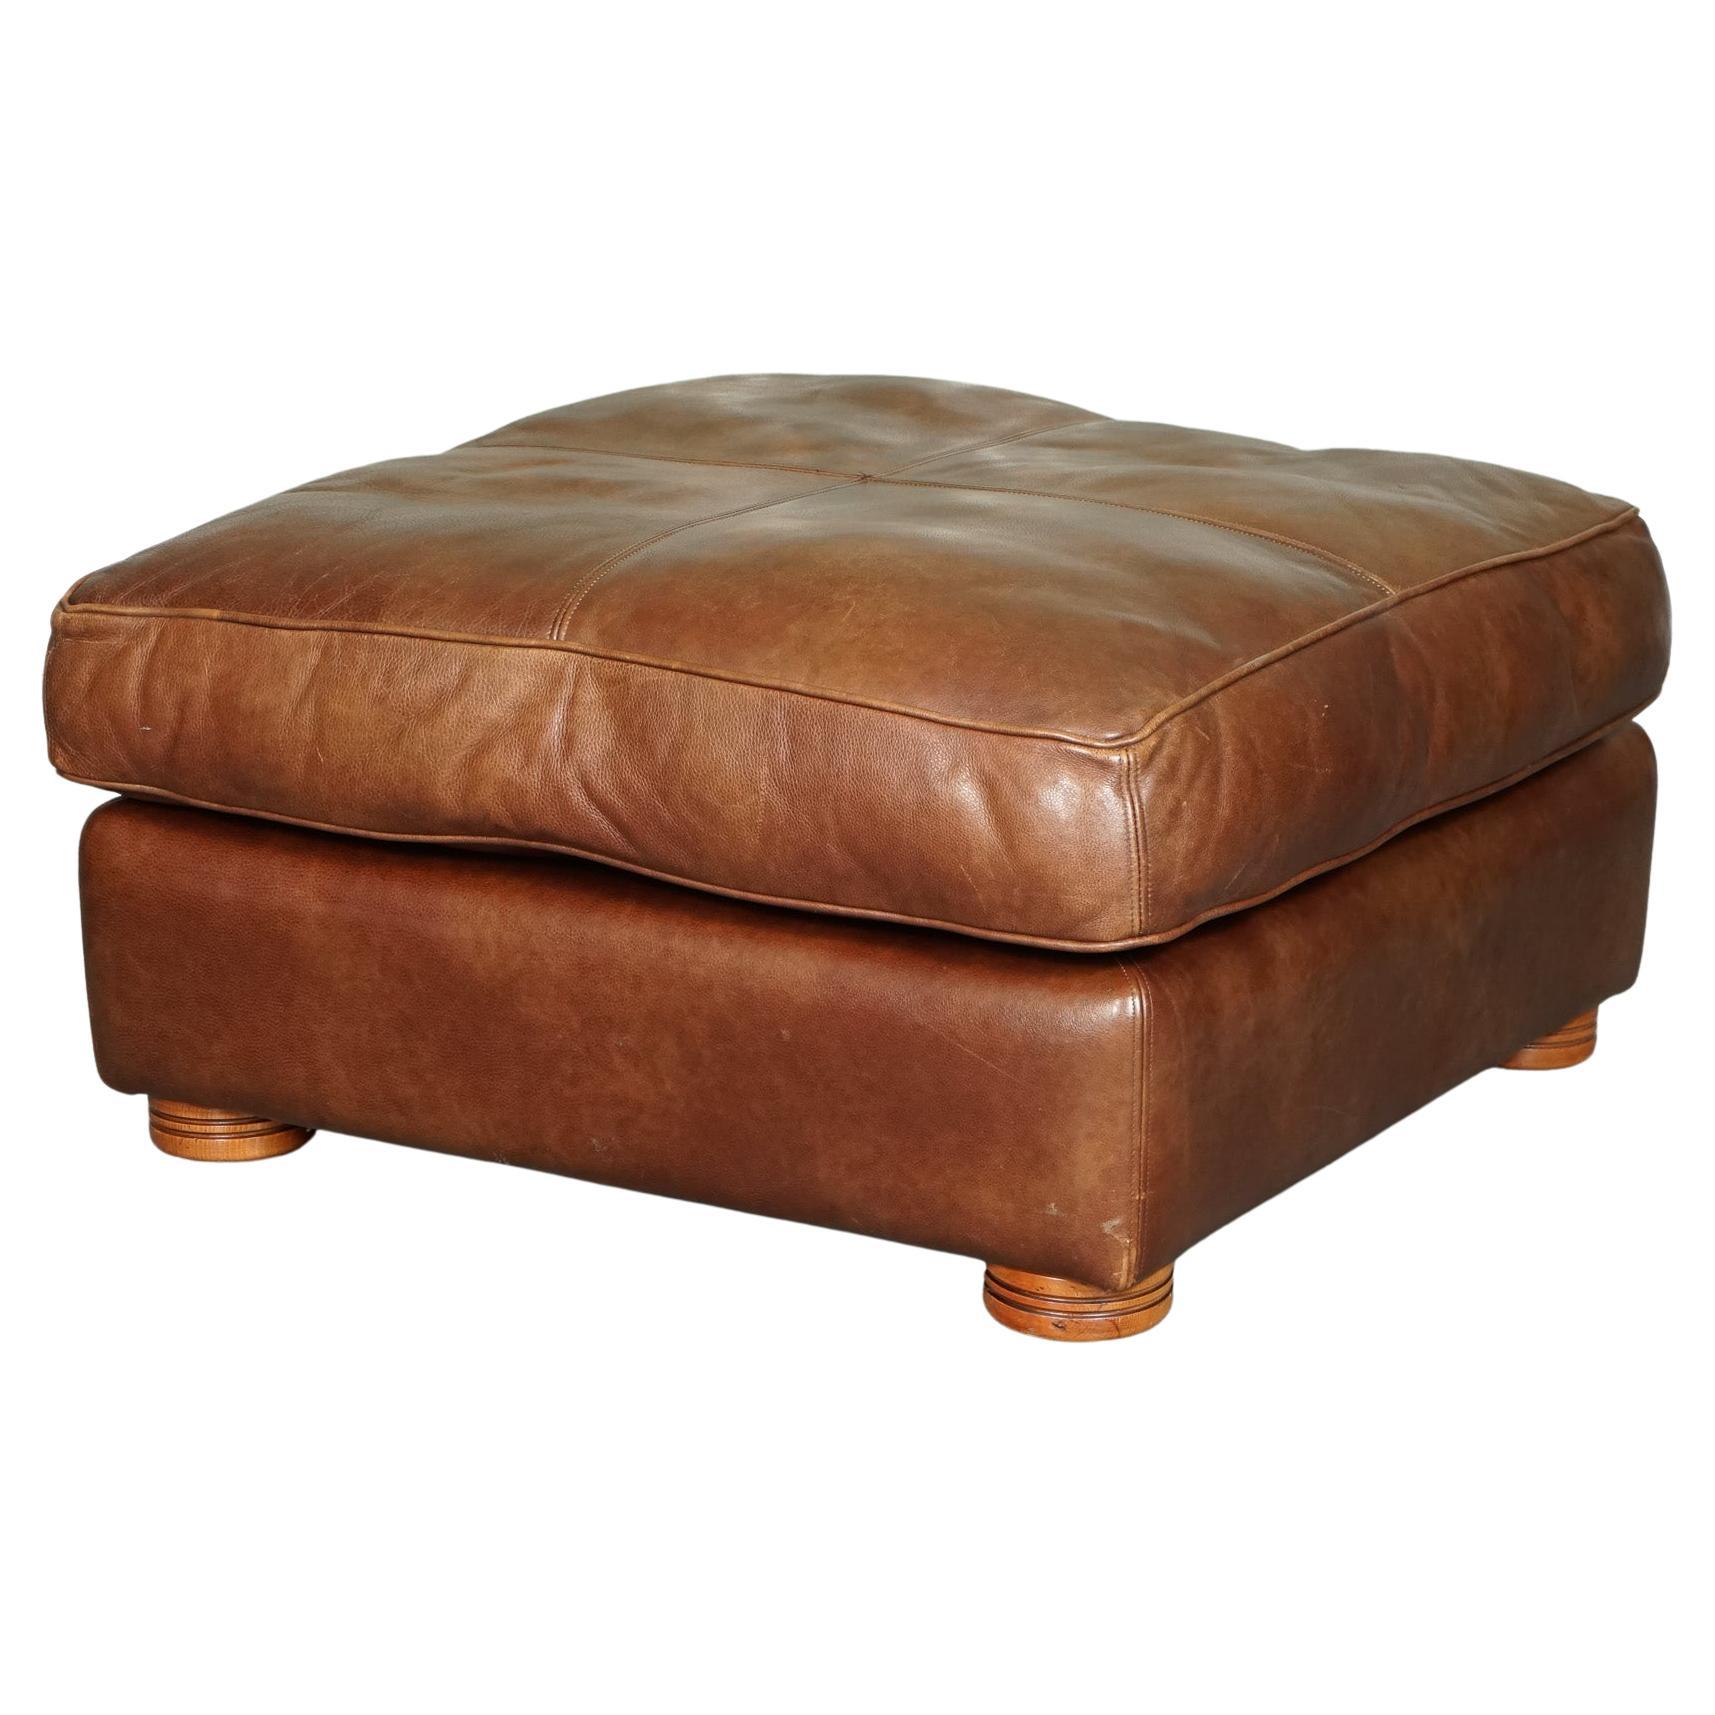 Duresta Chocolate Brown Leather Oversized Plantation Footstool For Sale